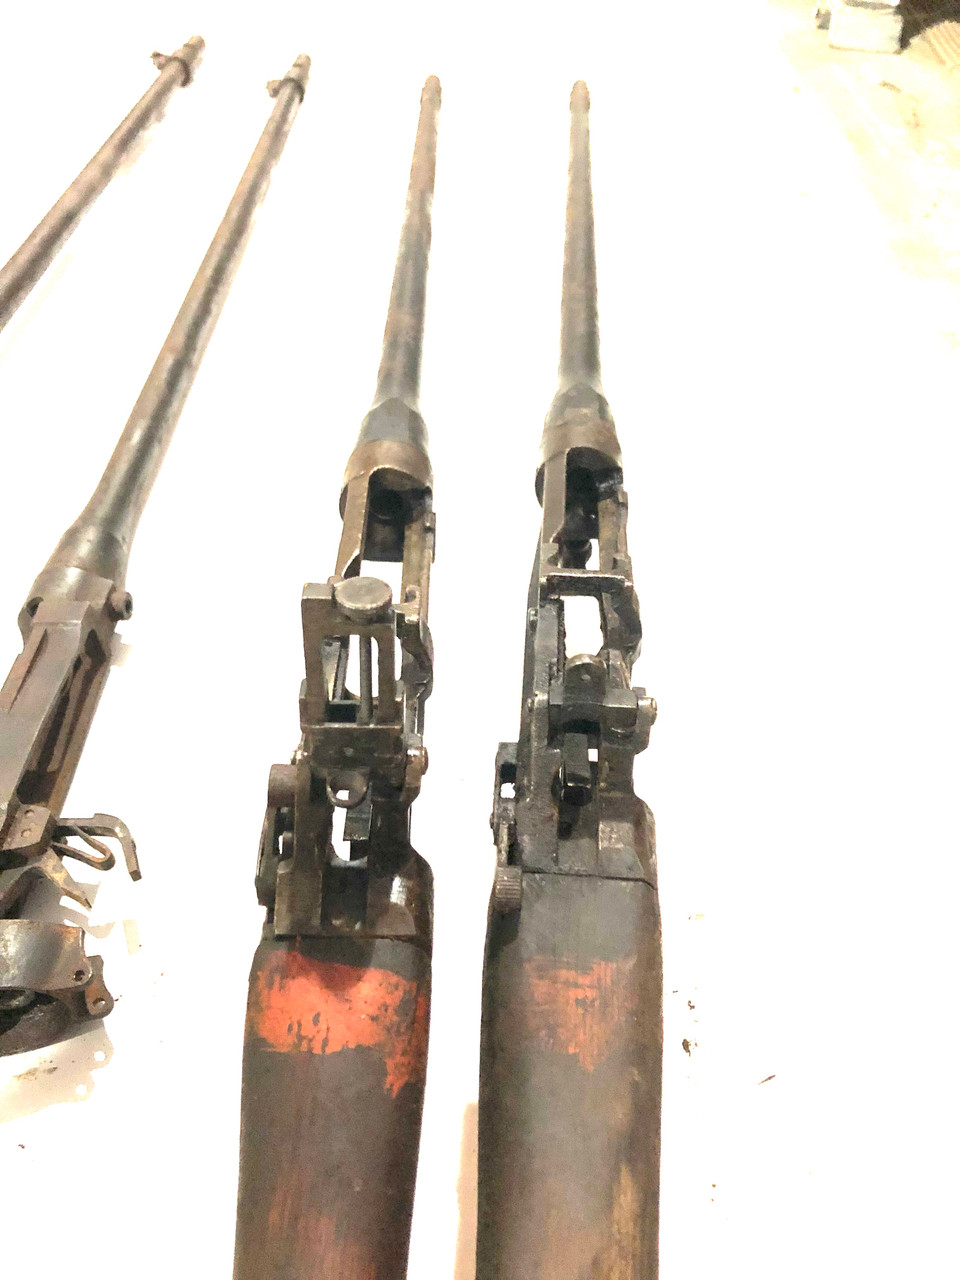 Lot 07: 4 x No4 Barreled Receivers (FFL Required)